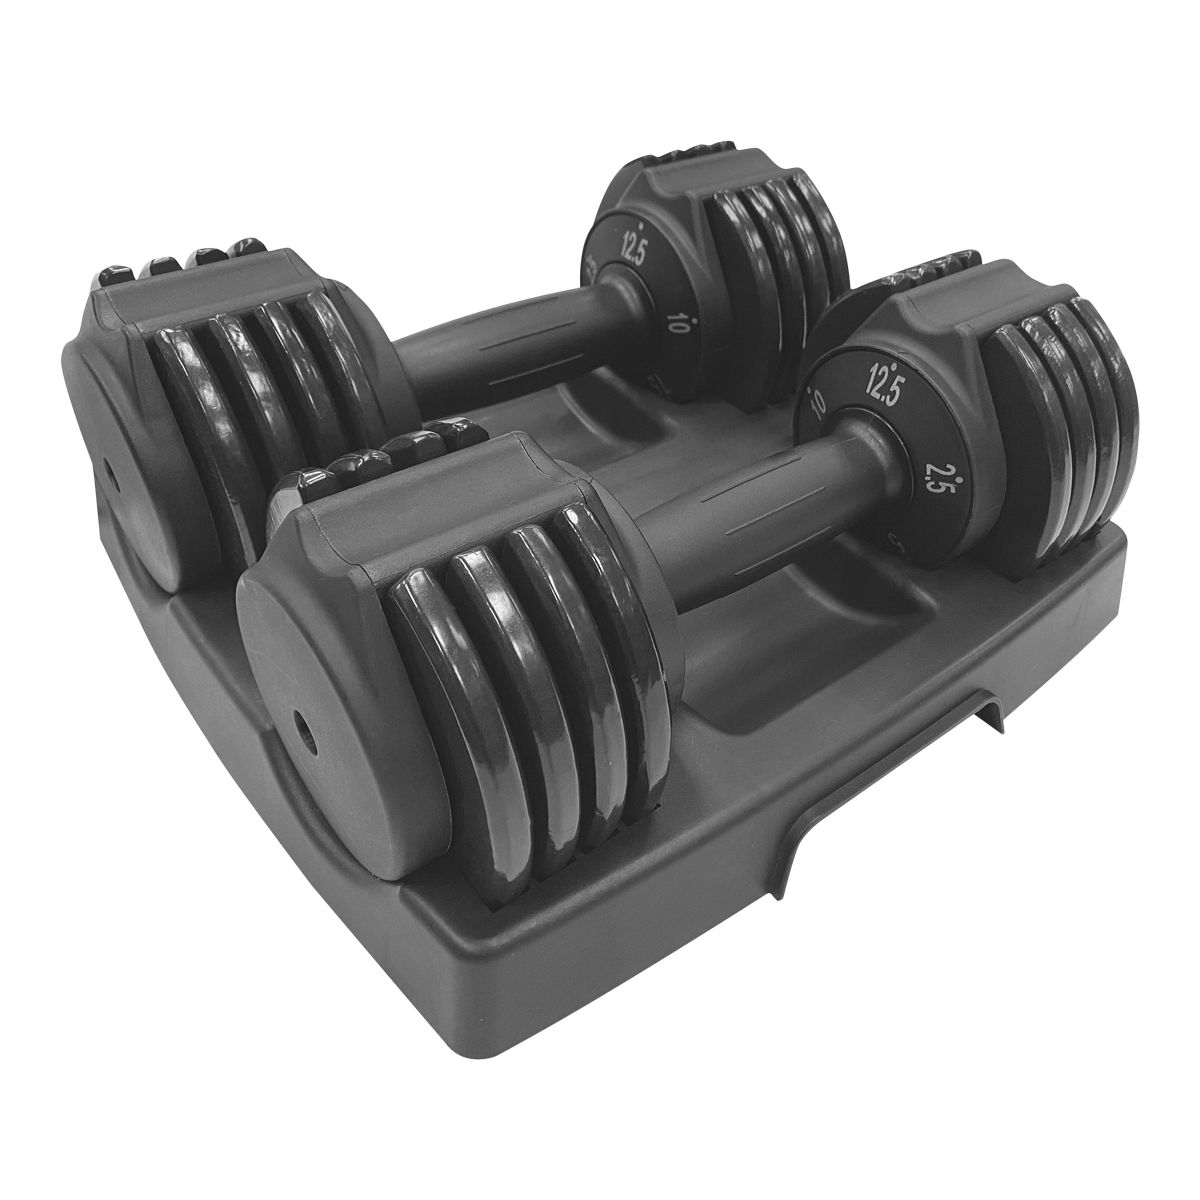 Image of Iron Body Fitness Adjustable 25 lbs Dumbbells Set - Pair